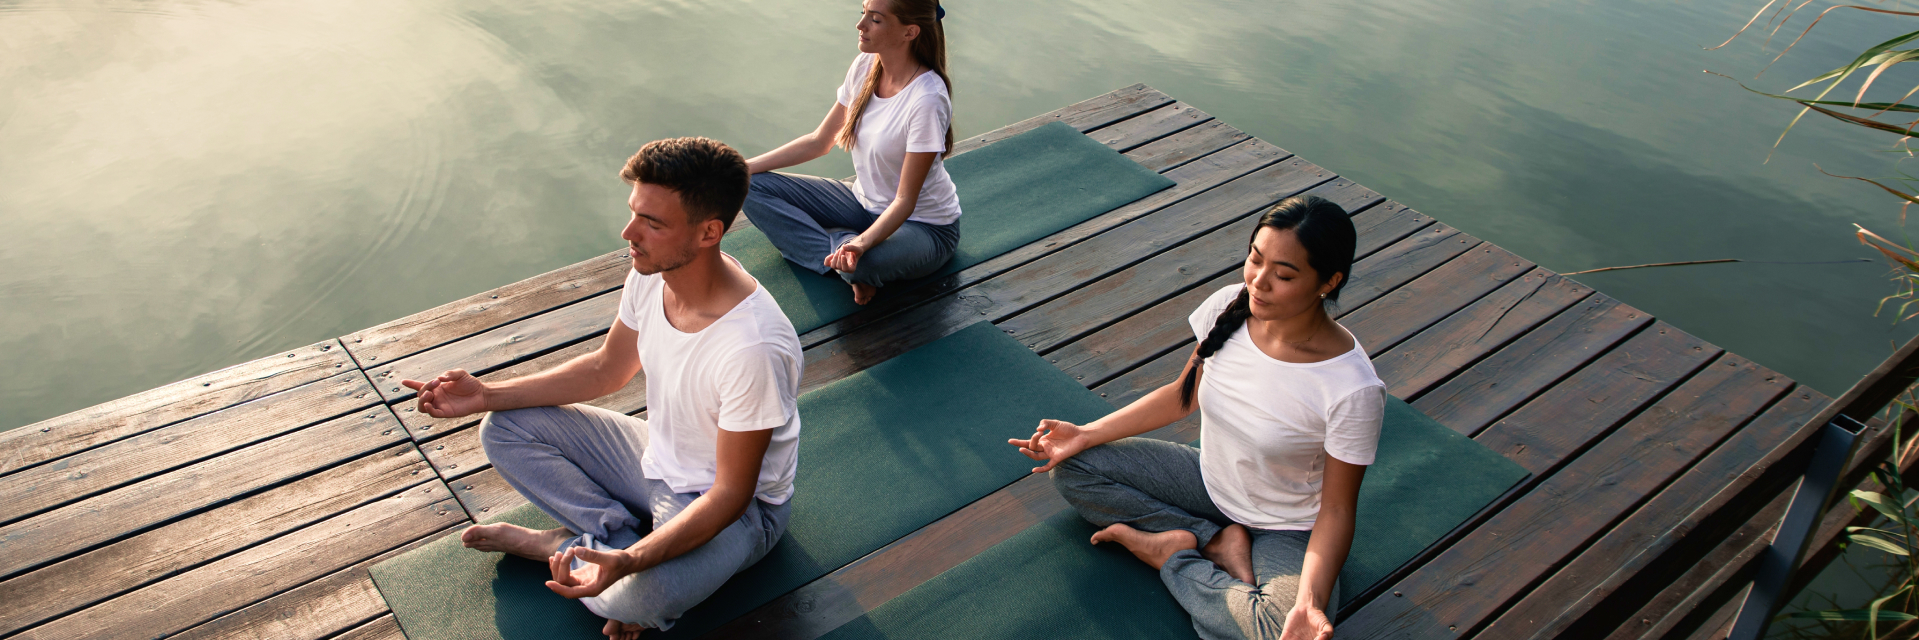 A photo of group of people meditating.